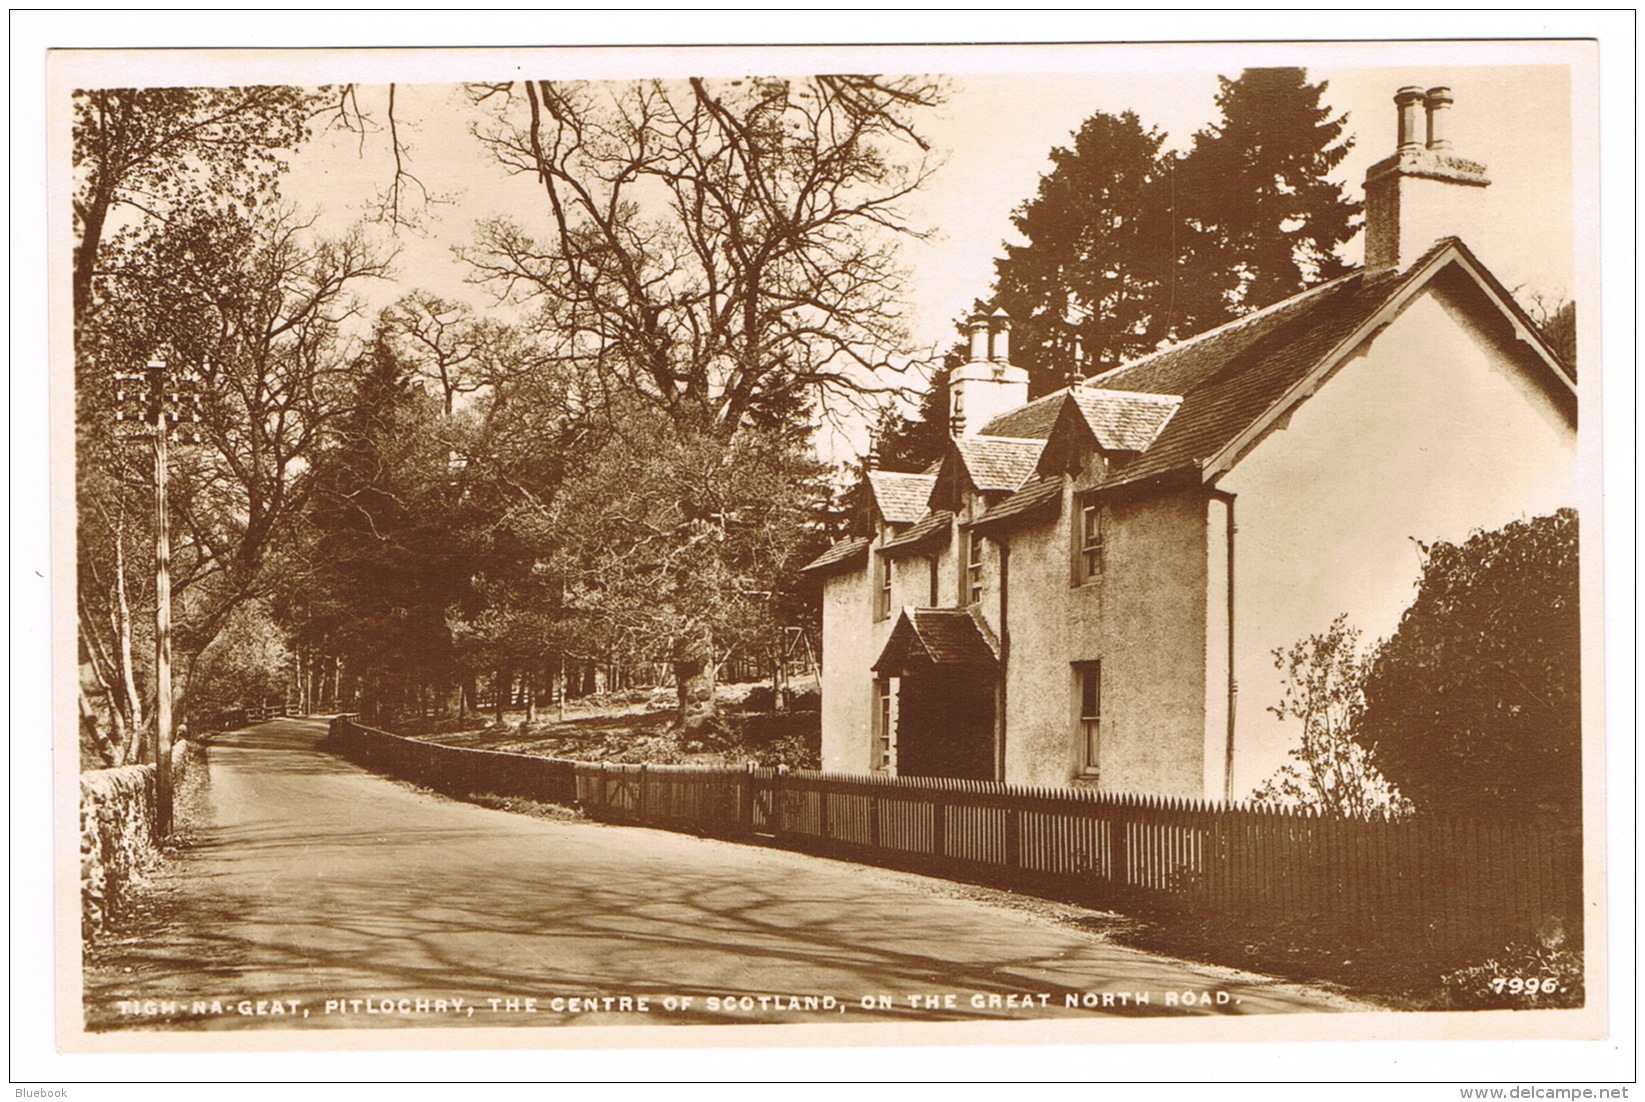 RB 1153 - Real Photo Postcard - Tigh-Na-Geat Pitlochry Great North Road - Perthshire Scotland - Perthshire